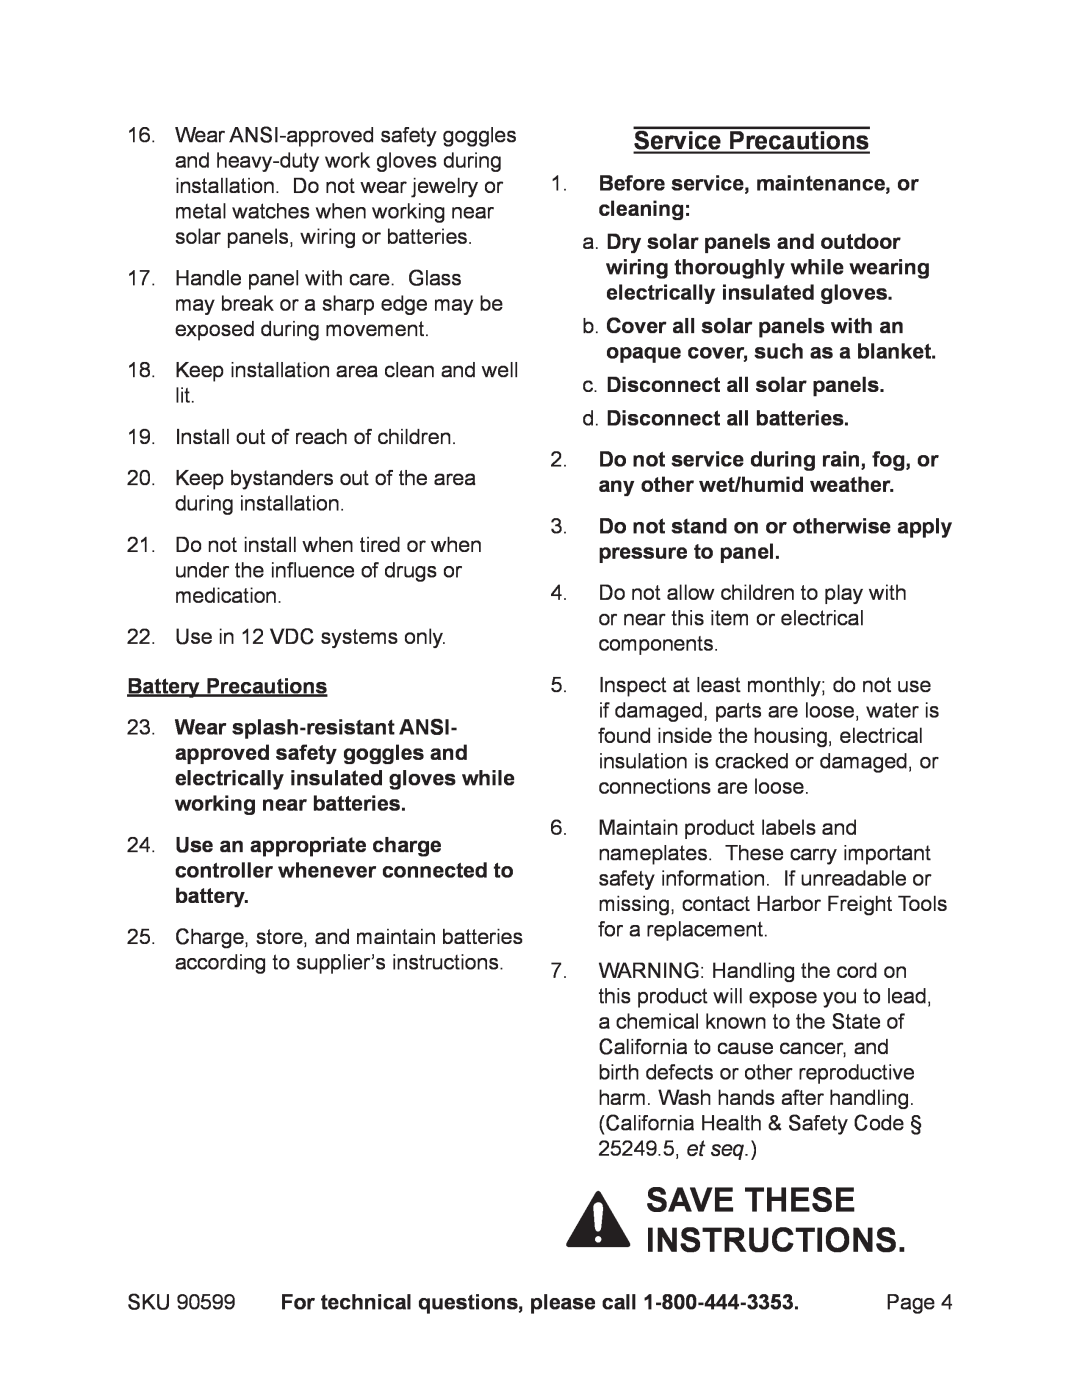 Chicago Electric 90599 manual Save these instructions, Service Precautions 